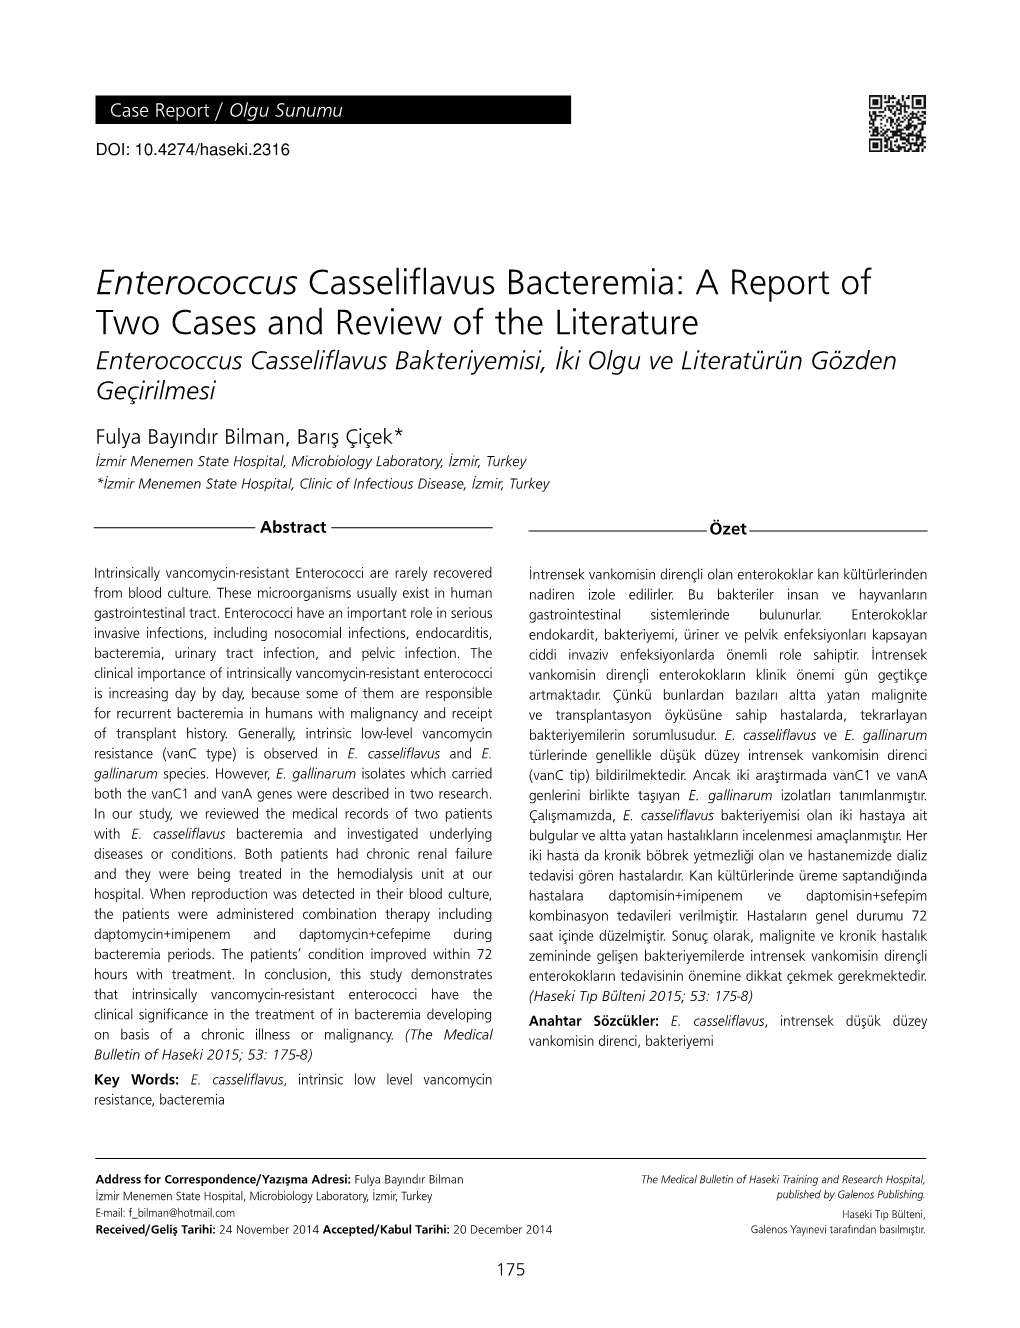 Enterococcus Casseliflavus Bacteremia: a Report of Two Cases and Review of the Literature